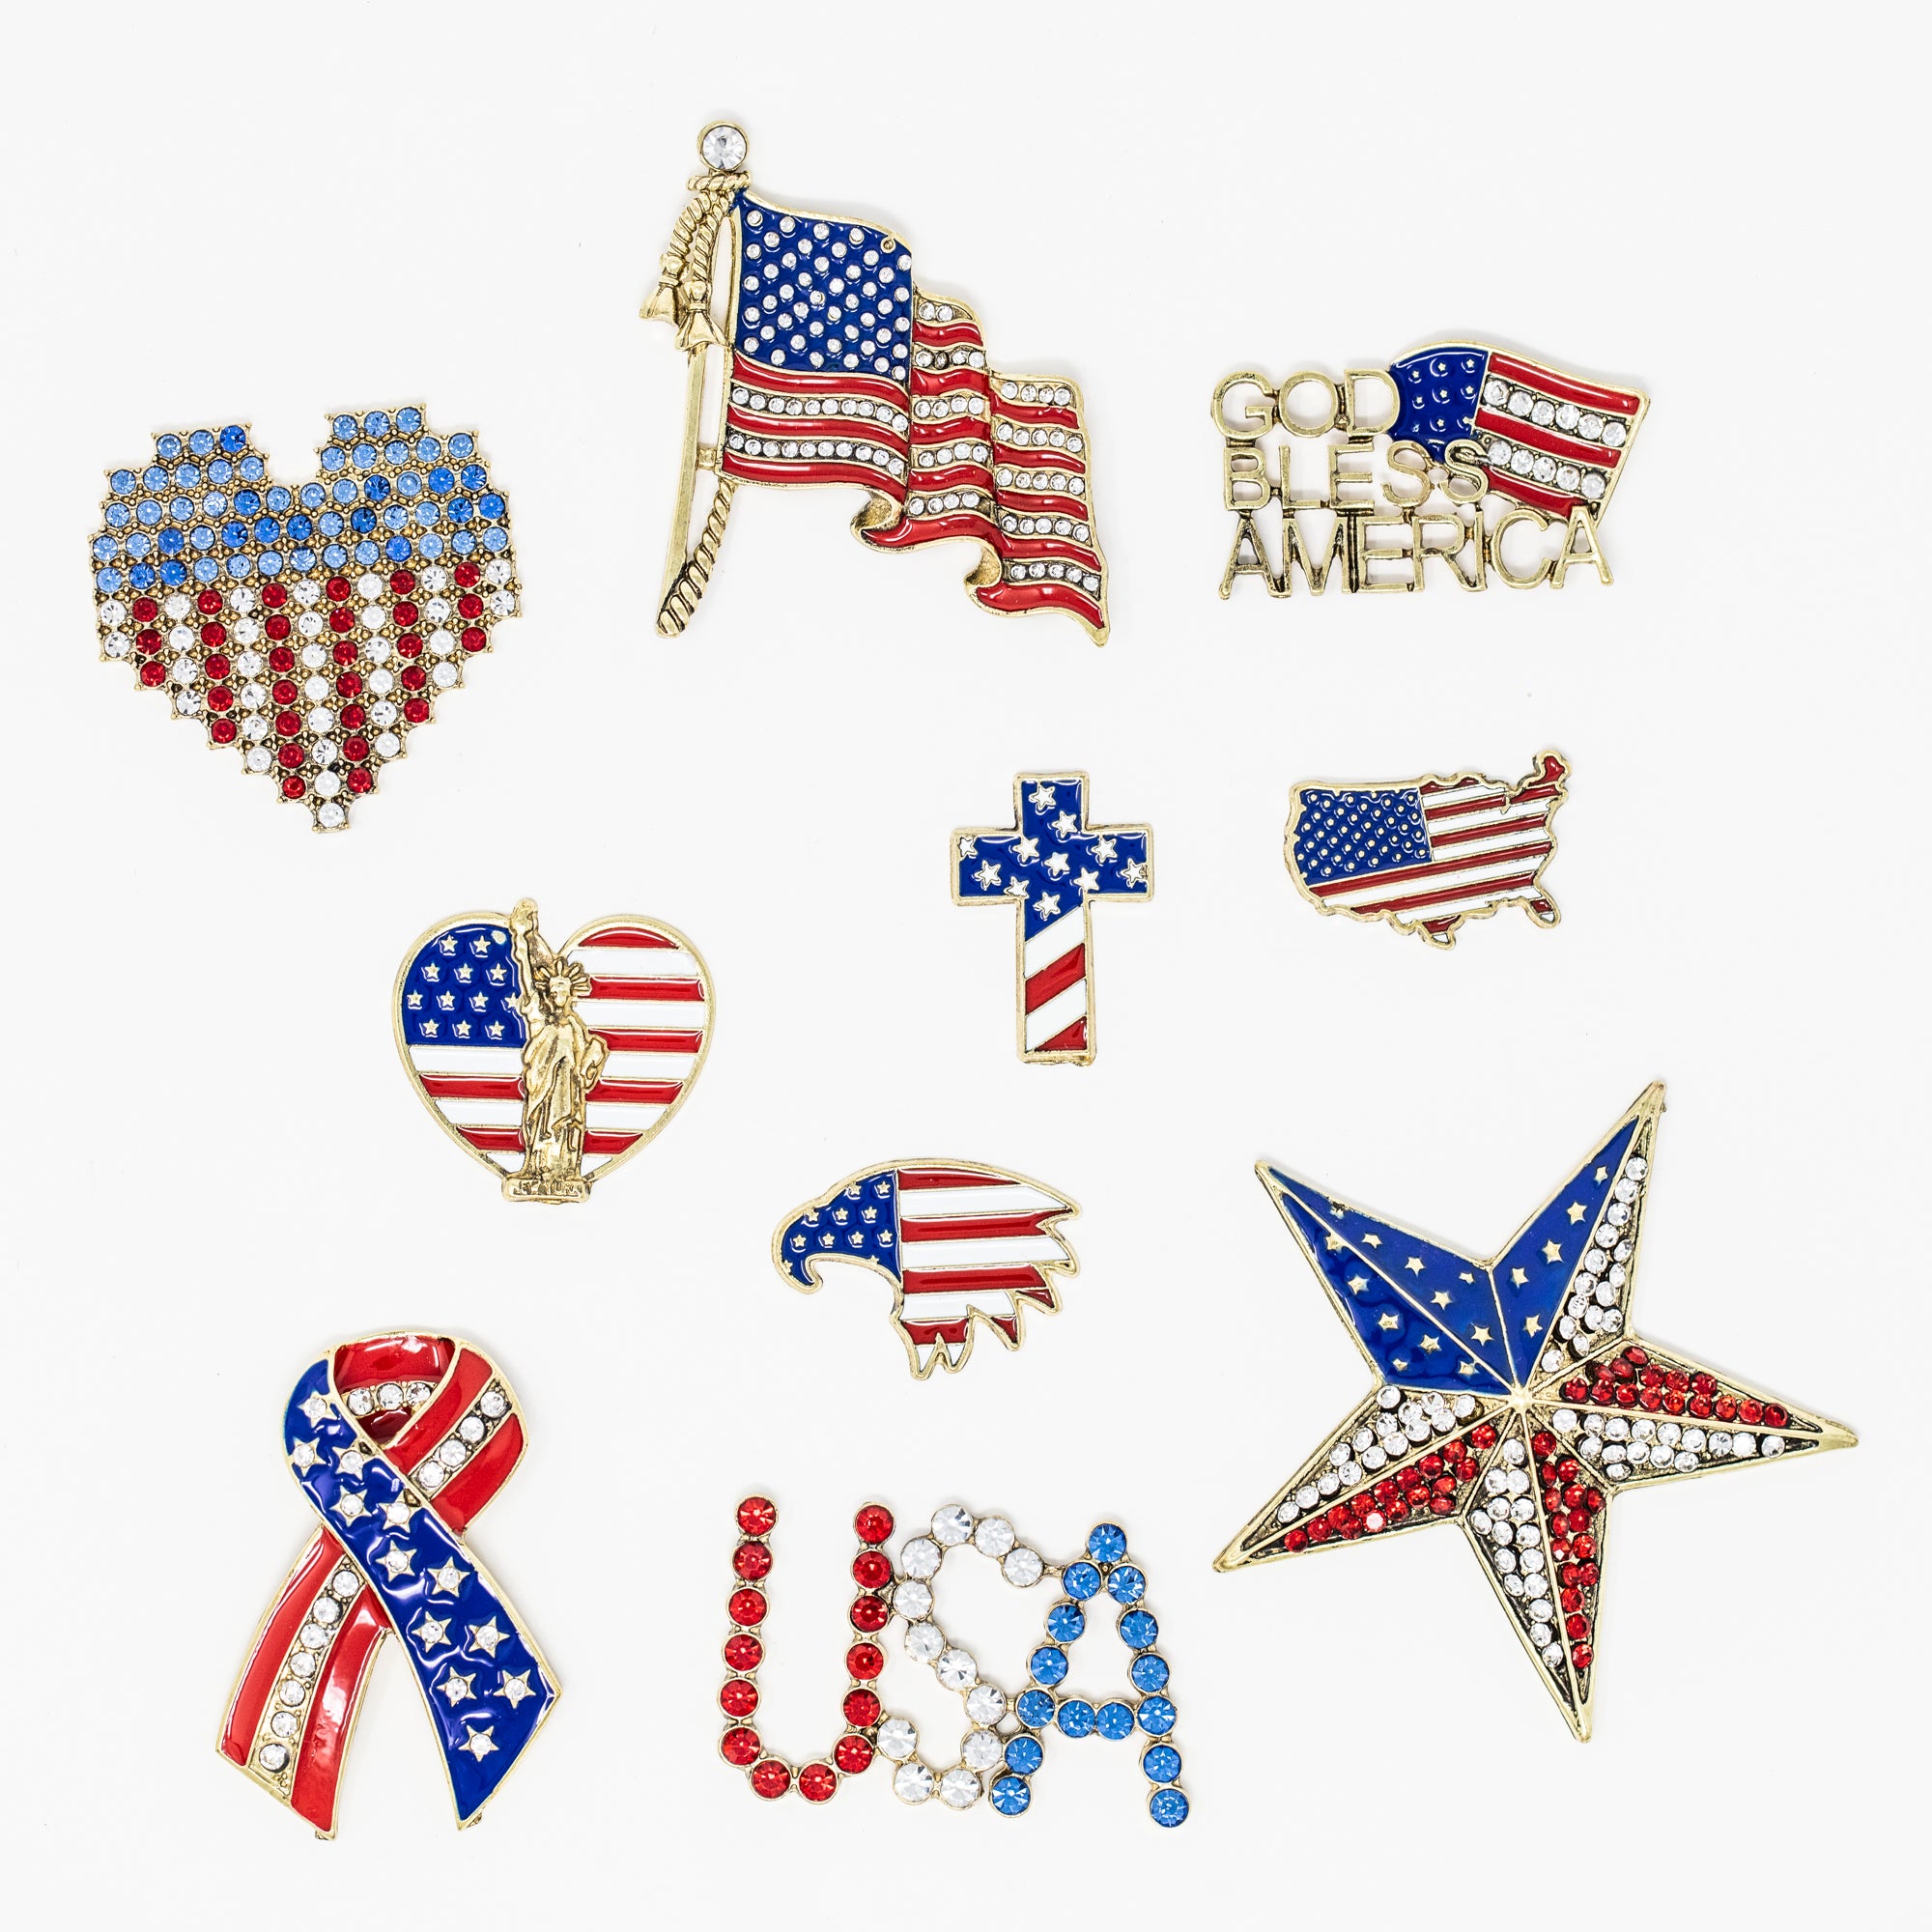 Patriotic Embellishments for Crafts USA bling